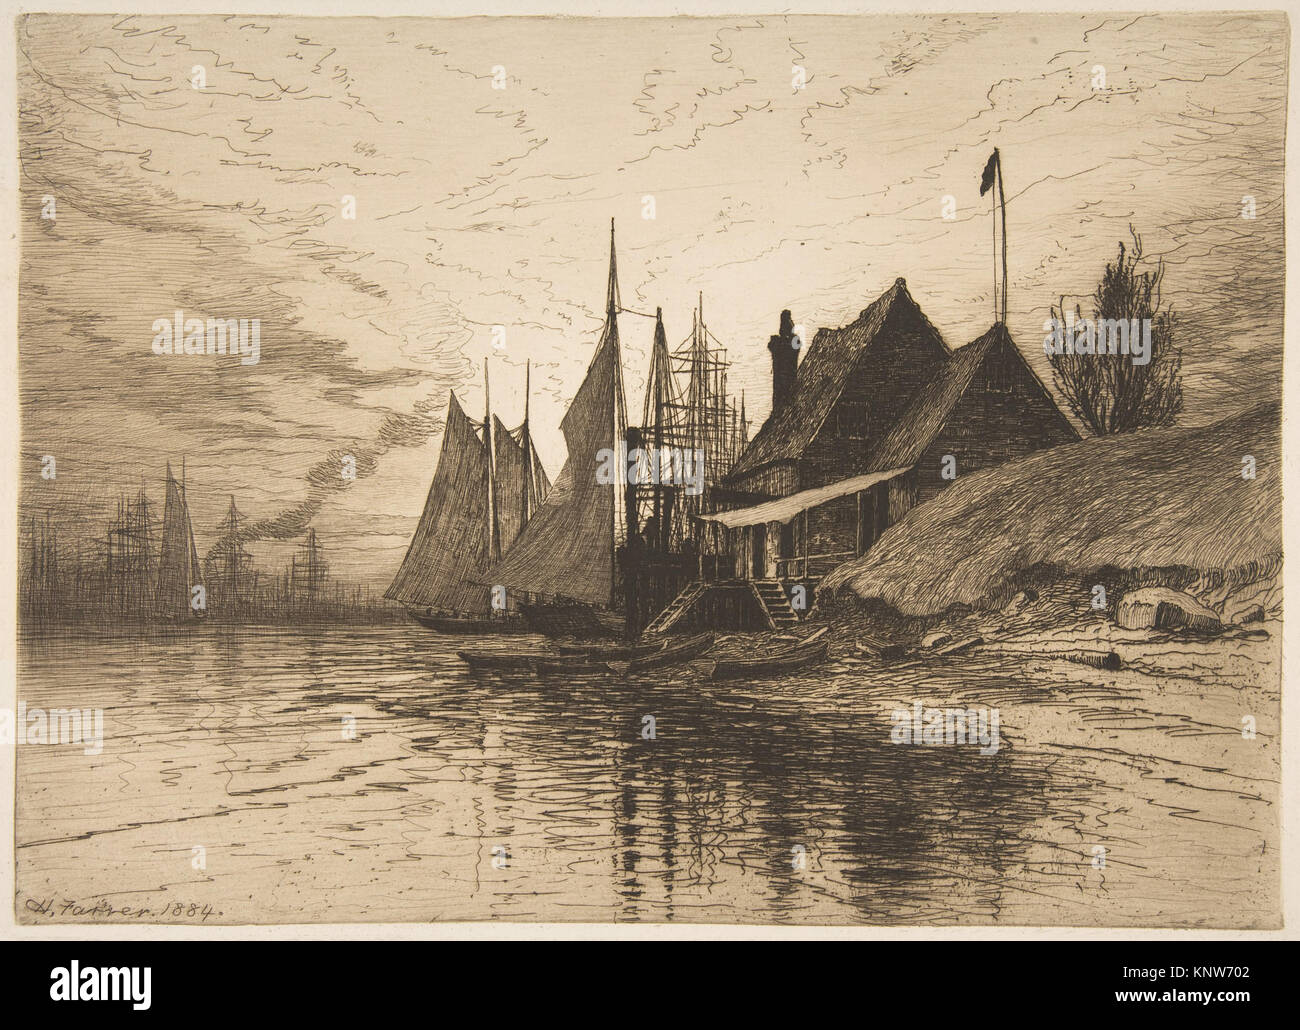 Evening, New York Harbor MET DP818556 381008 Artist: Henry Farrer, American, London 1844?1903 New York, Evening, New York Harbor, 1884, Etching, Plate: 9 3/4 ? 13 7/16 in. (24.7 ? 34.2 cm) Sheet: 14 1/16 x 18 1/8 in. (35.7 x 46.1 cm). The Metropolitan Museum of Art, New York. The Edward W. C. Arnold Collection of New York Prints, Maps and Pictures, Bequest of Edward W. C. Arnold, 1954 (54.90.946) Stock Photo